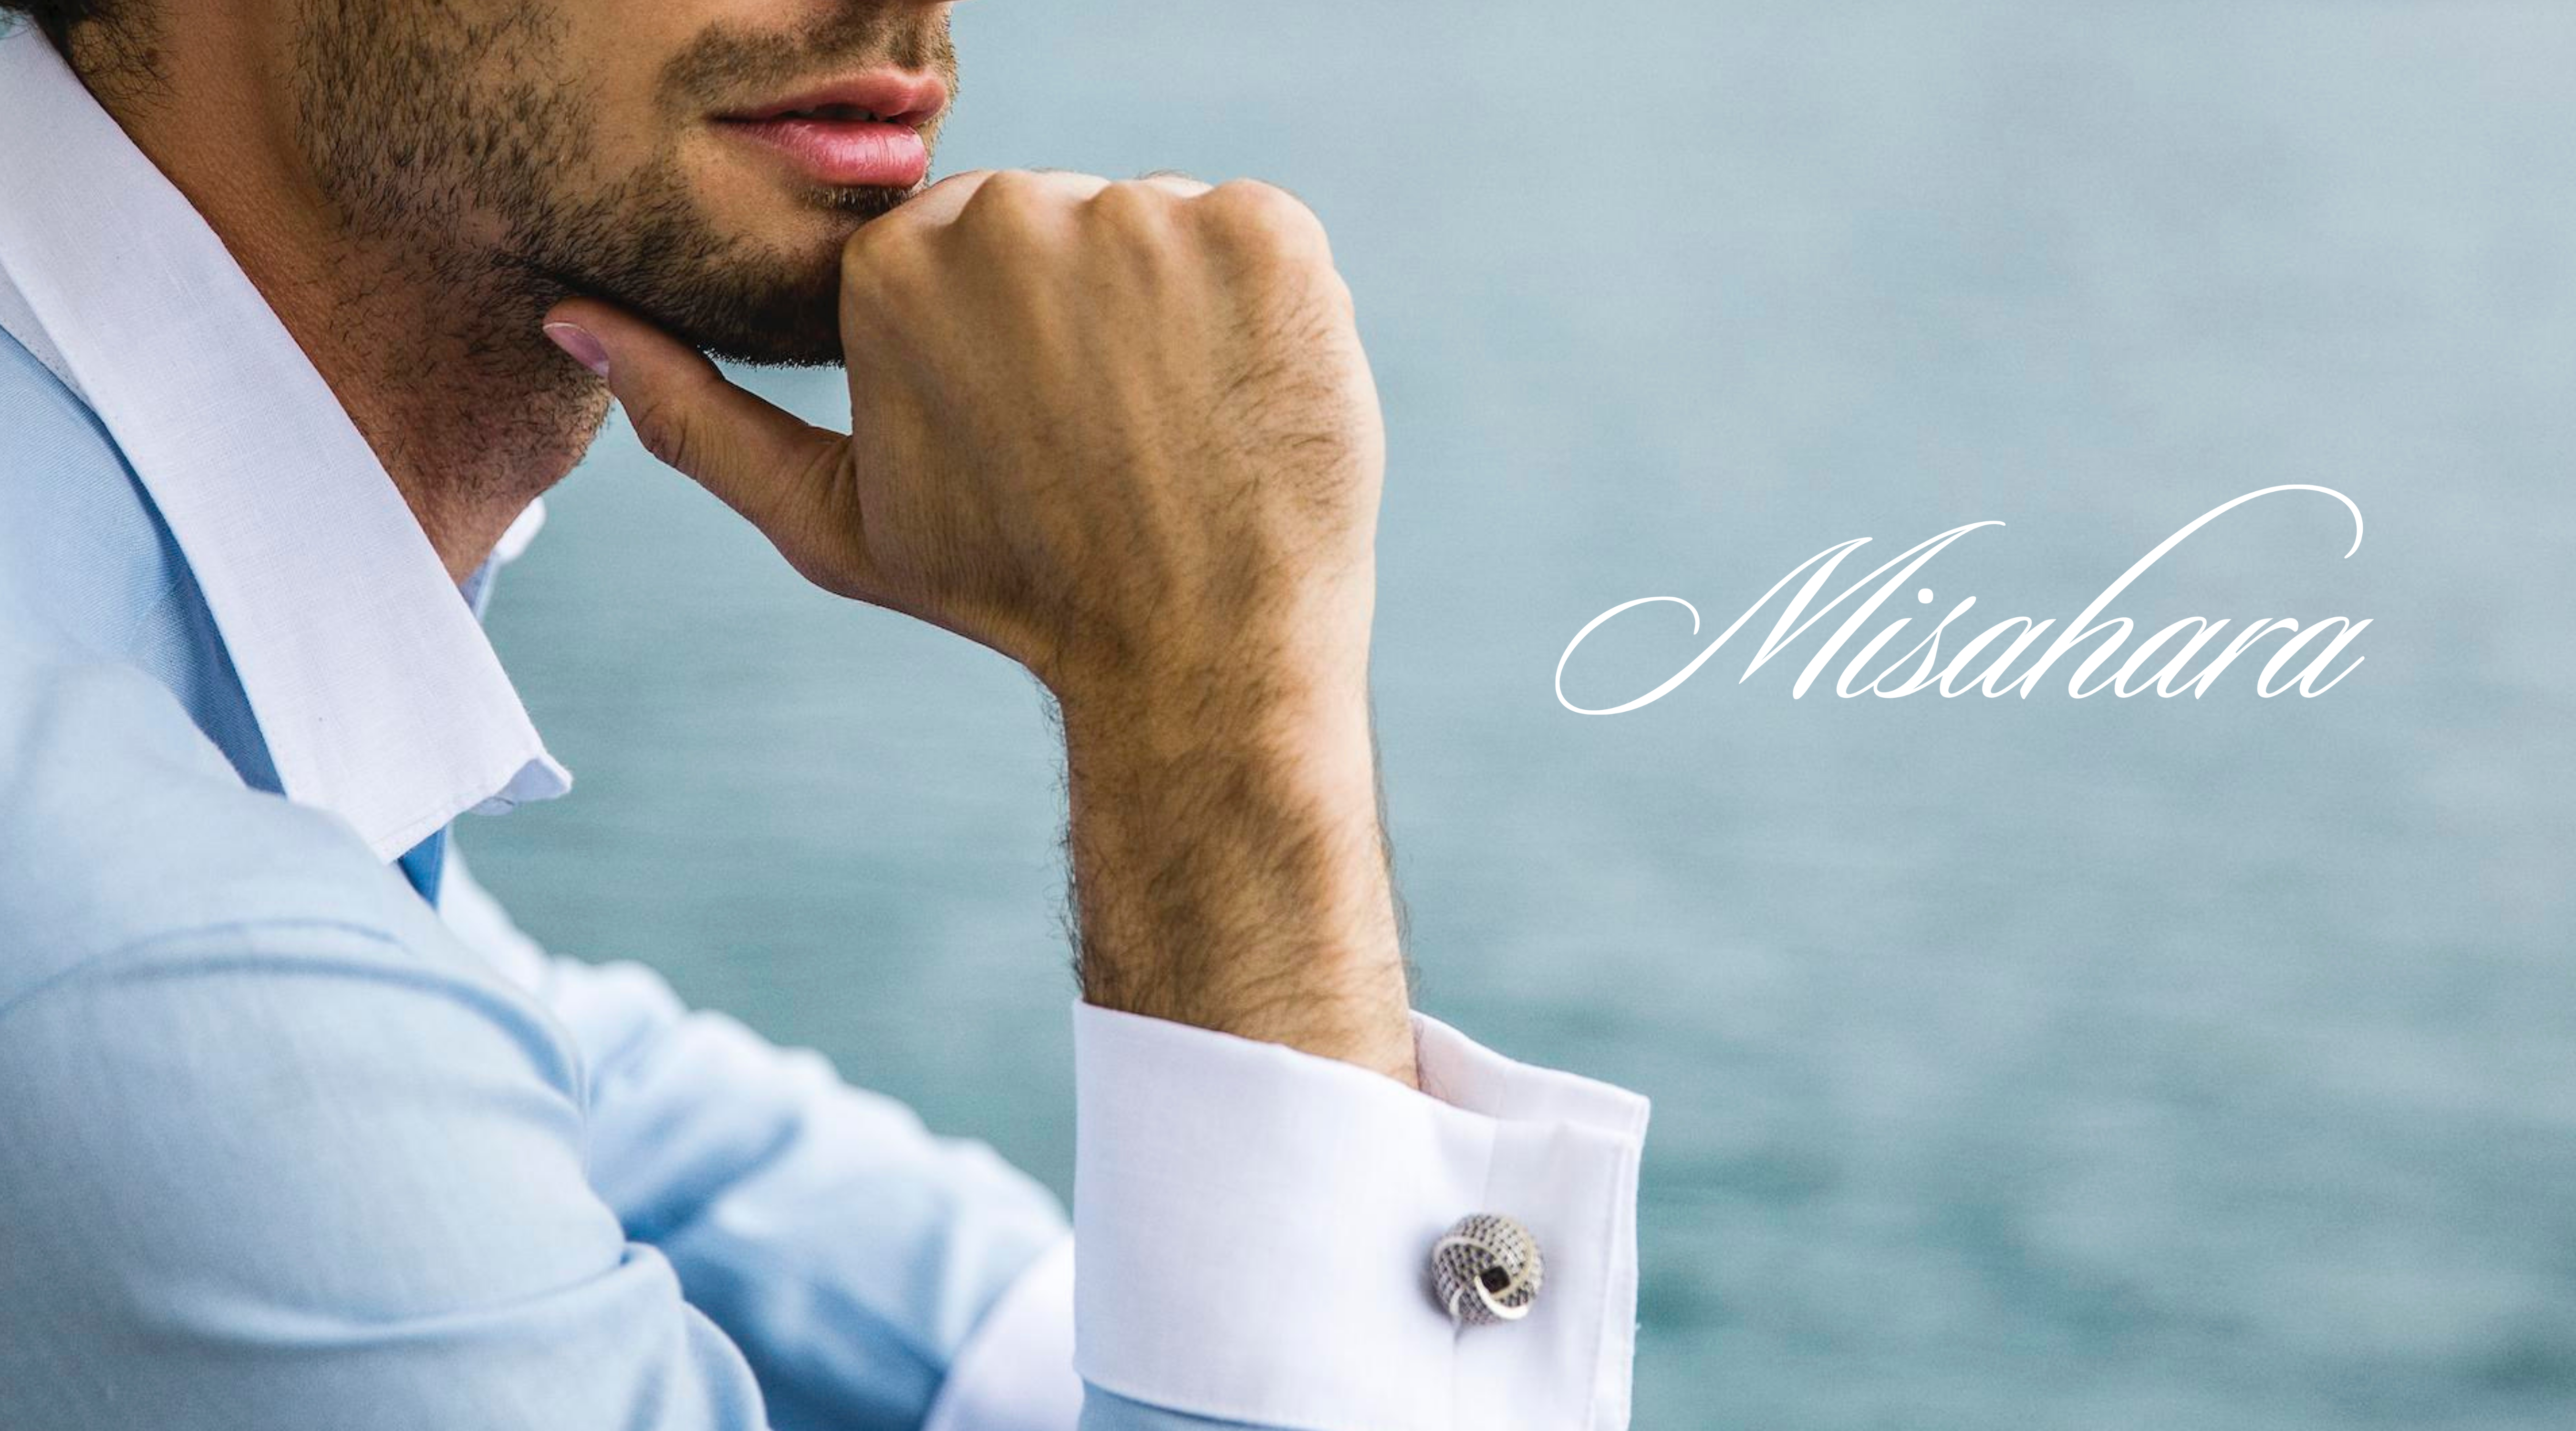 we asked men what they really want for holidays-Misahara gift guide